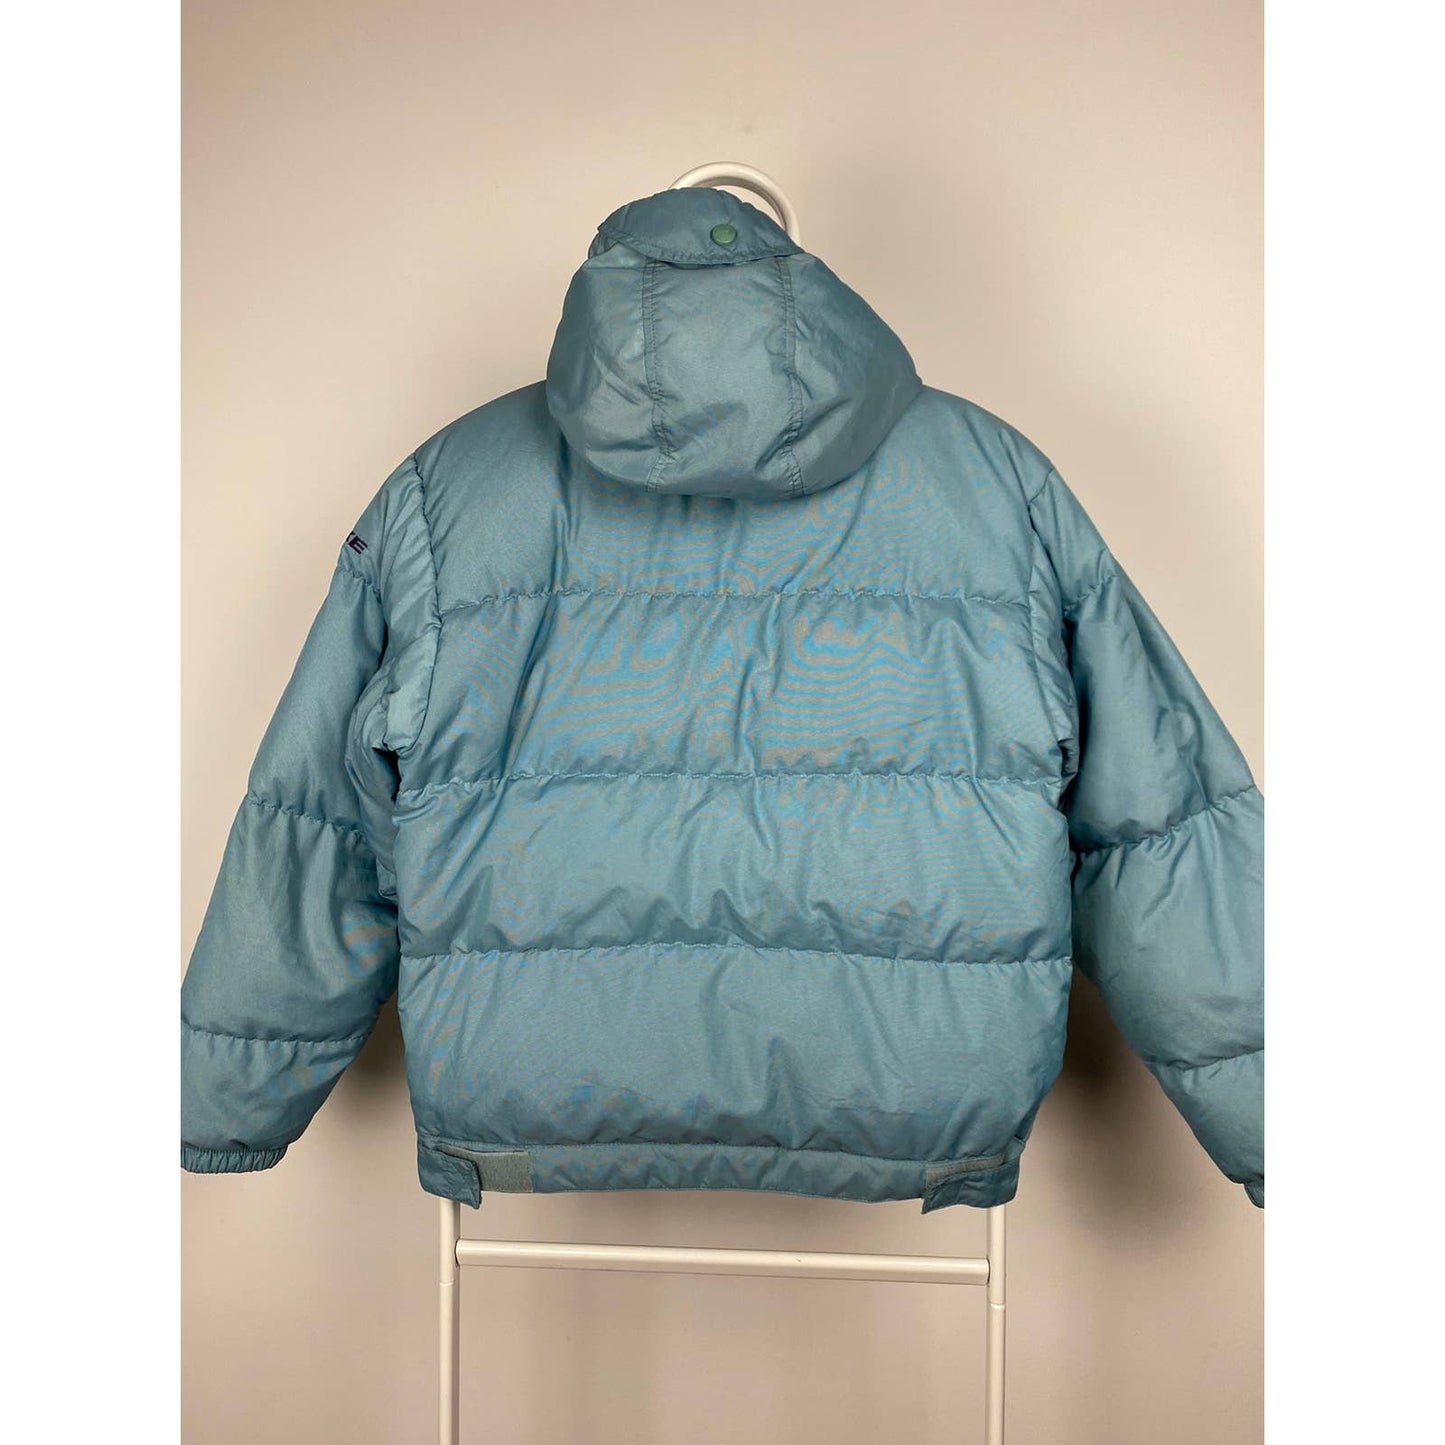 90s Nike vintage baby blue puffer jacket small swoosh